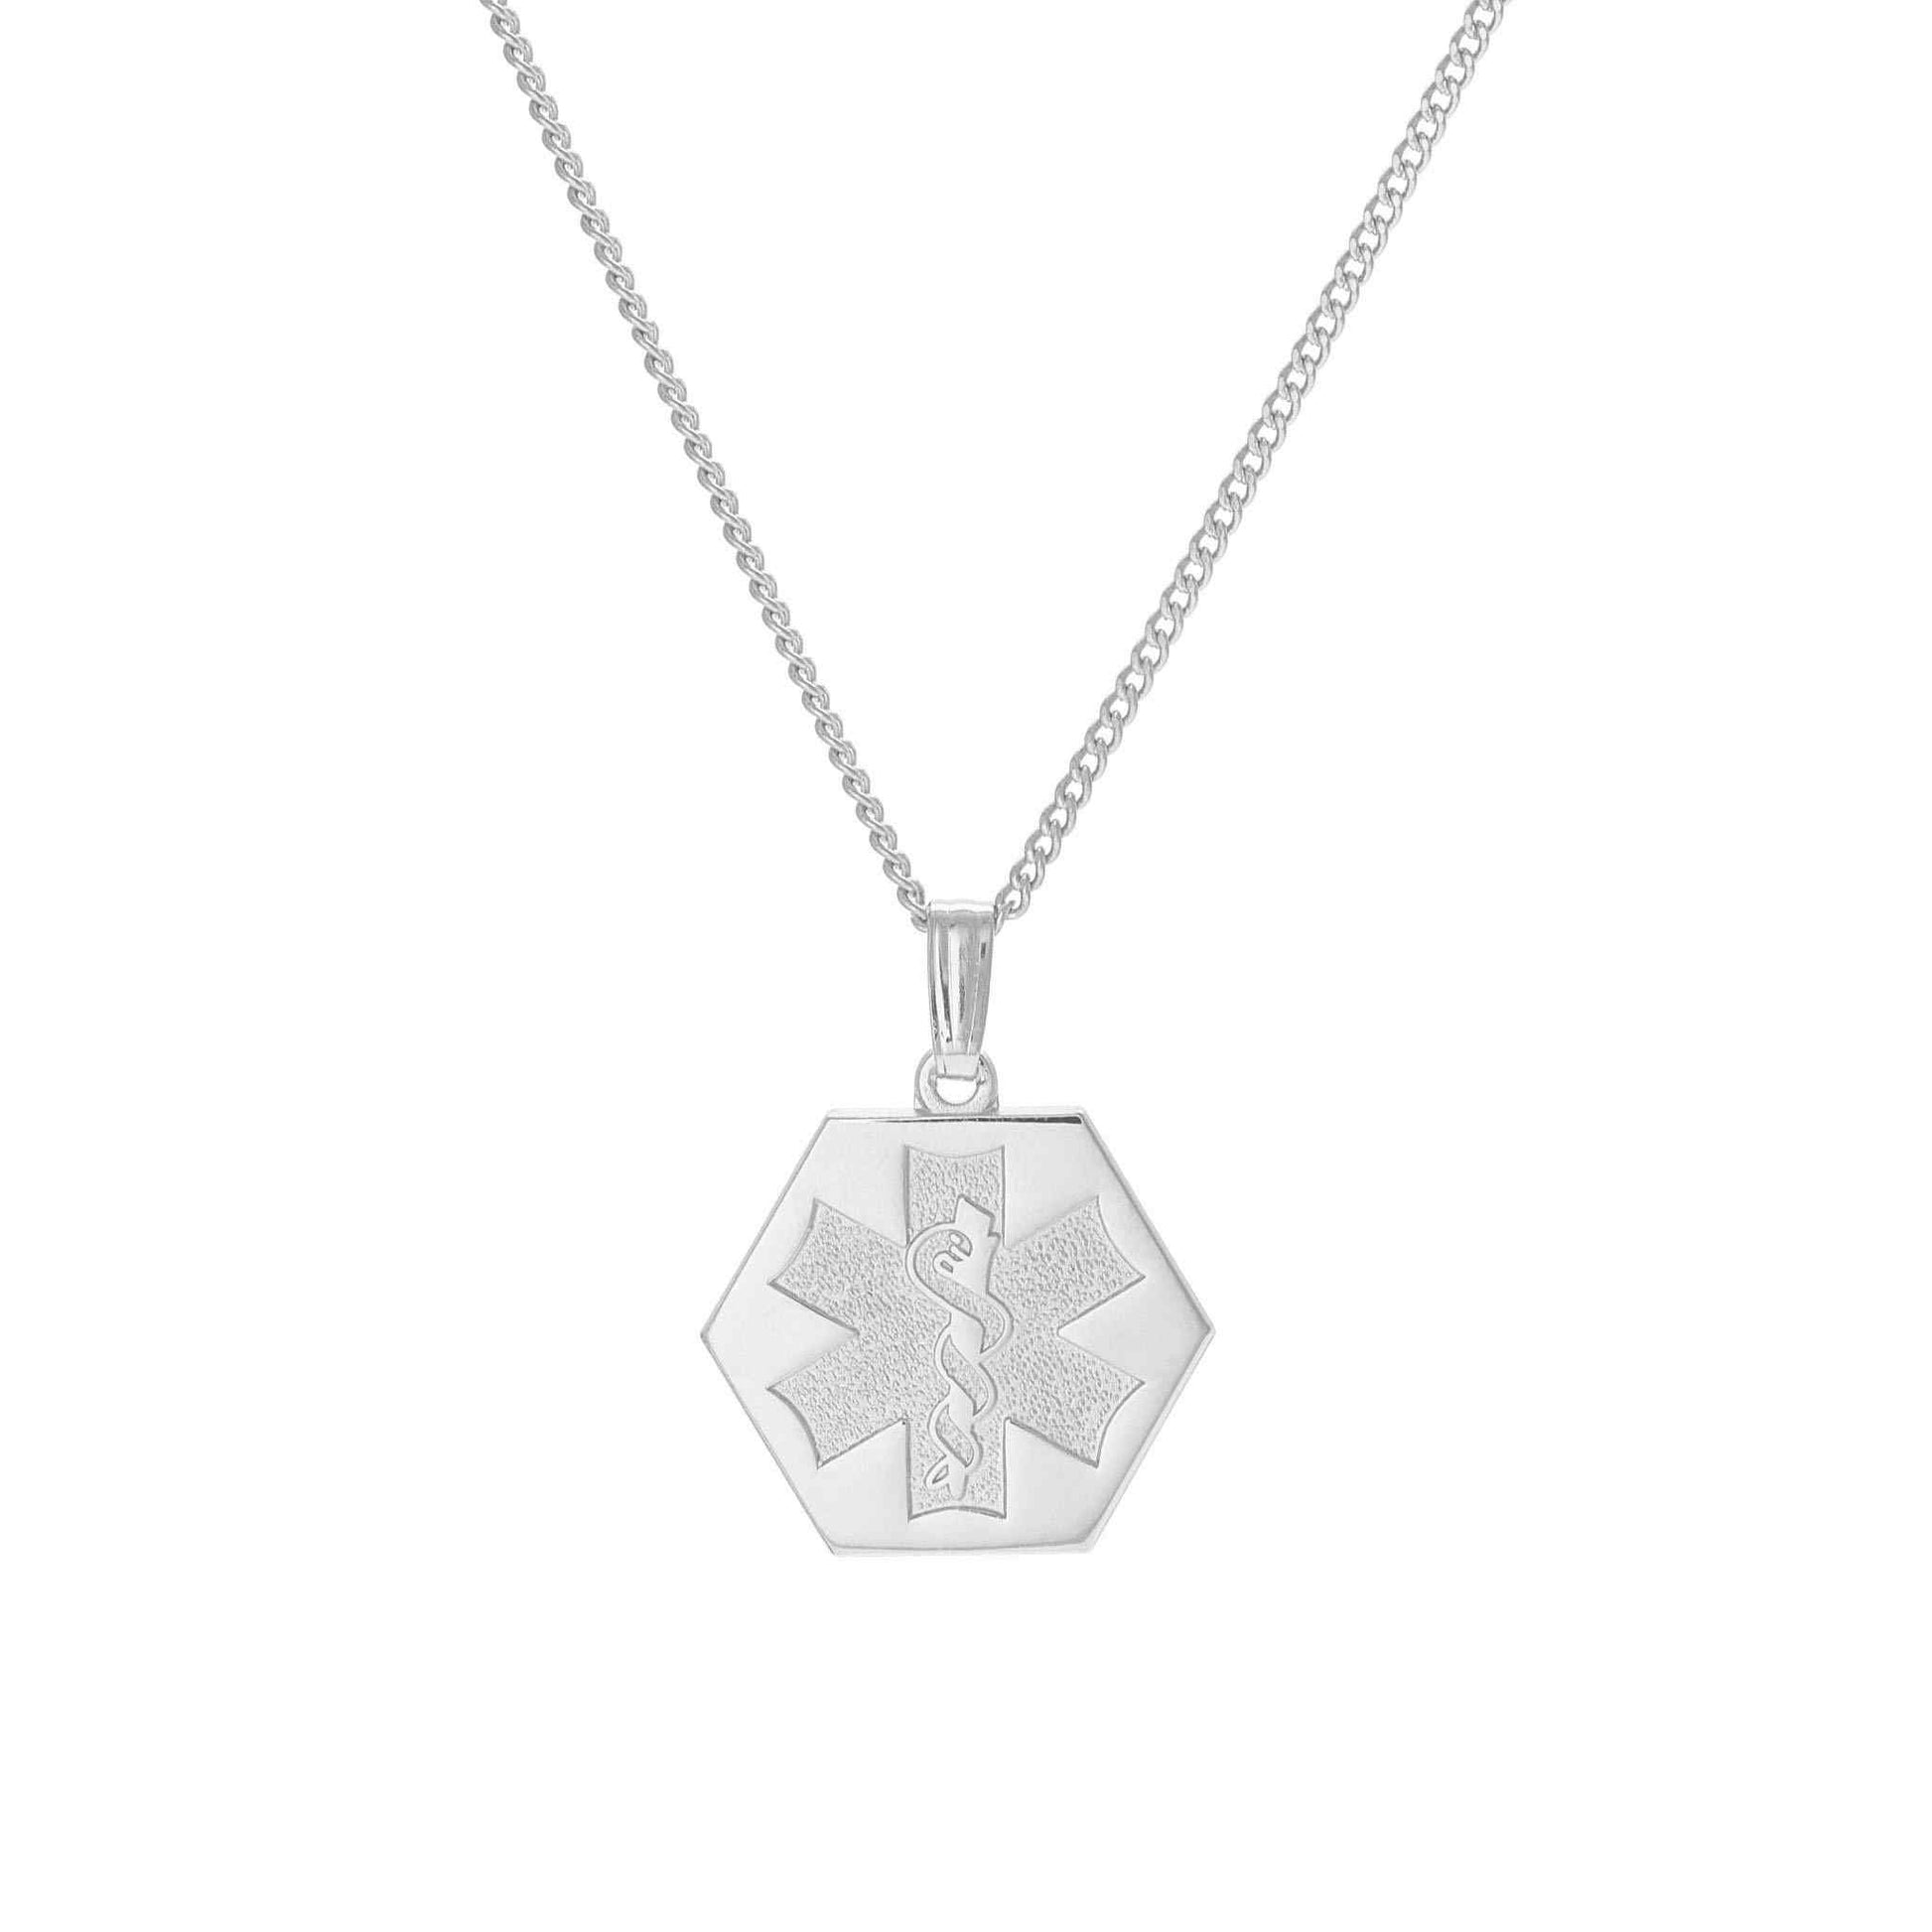 A sandblsted medical necklace displayed on a neutral white background.